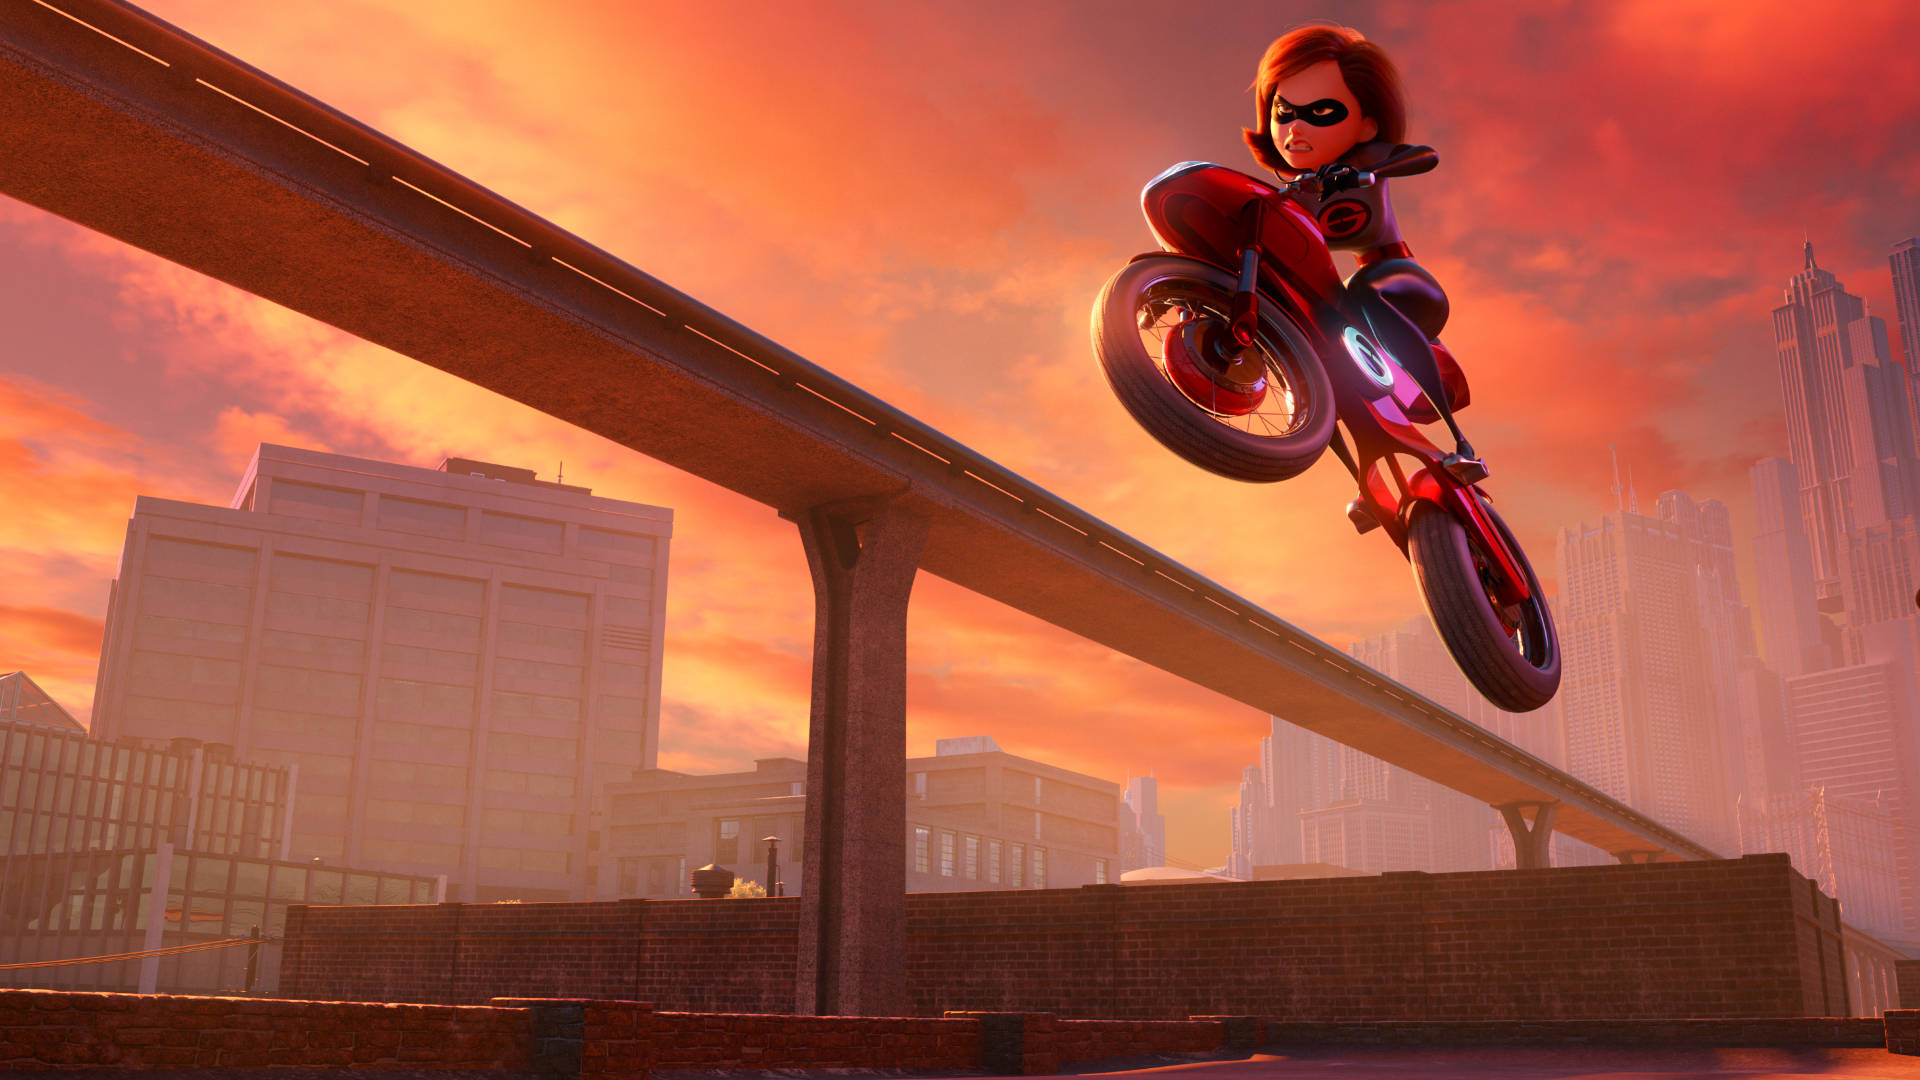 Elastigirl Displaying Her Superpower On A Motorcycle Background